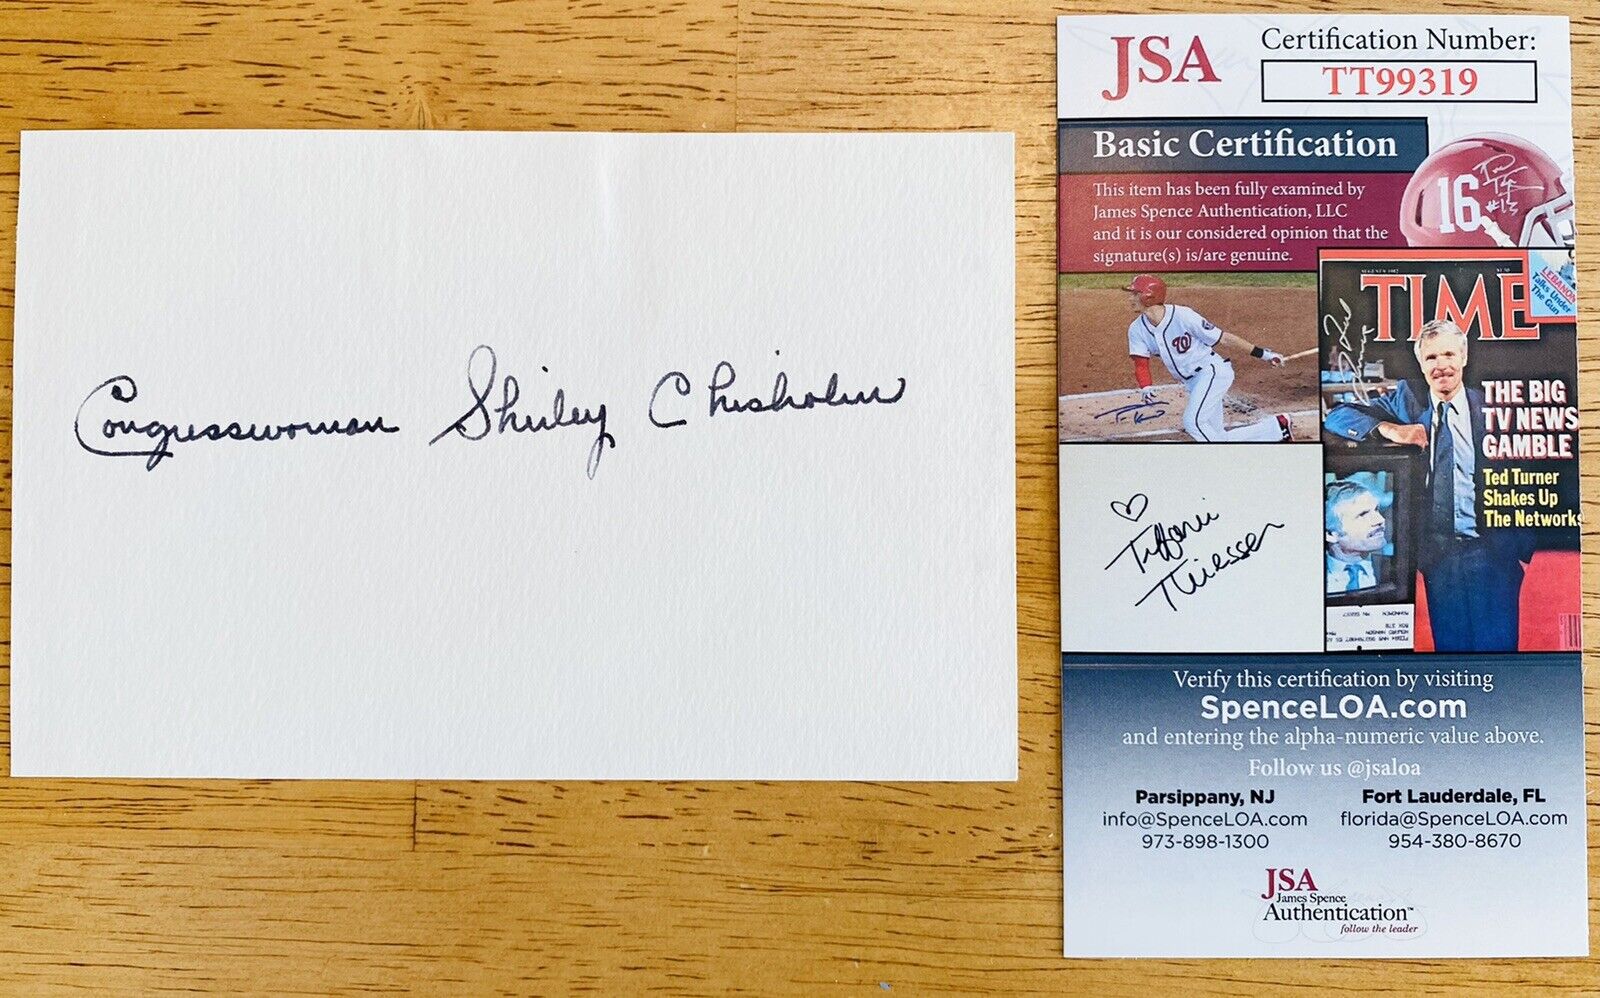 Shirley Chisholm Signed Autographed 3.5 x 5.5 Card JSA Certified Congresswoman